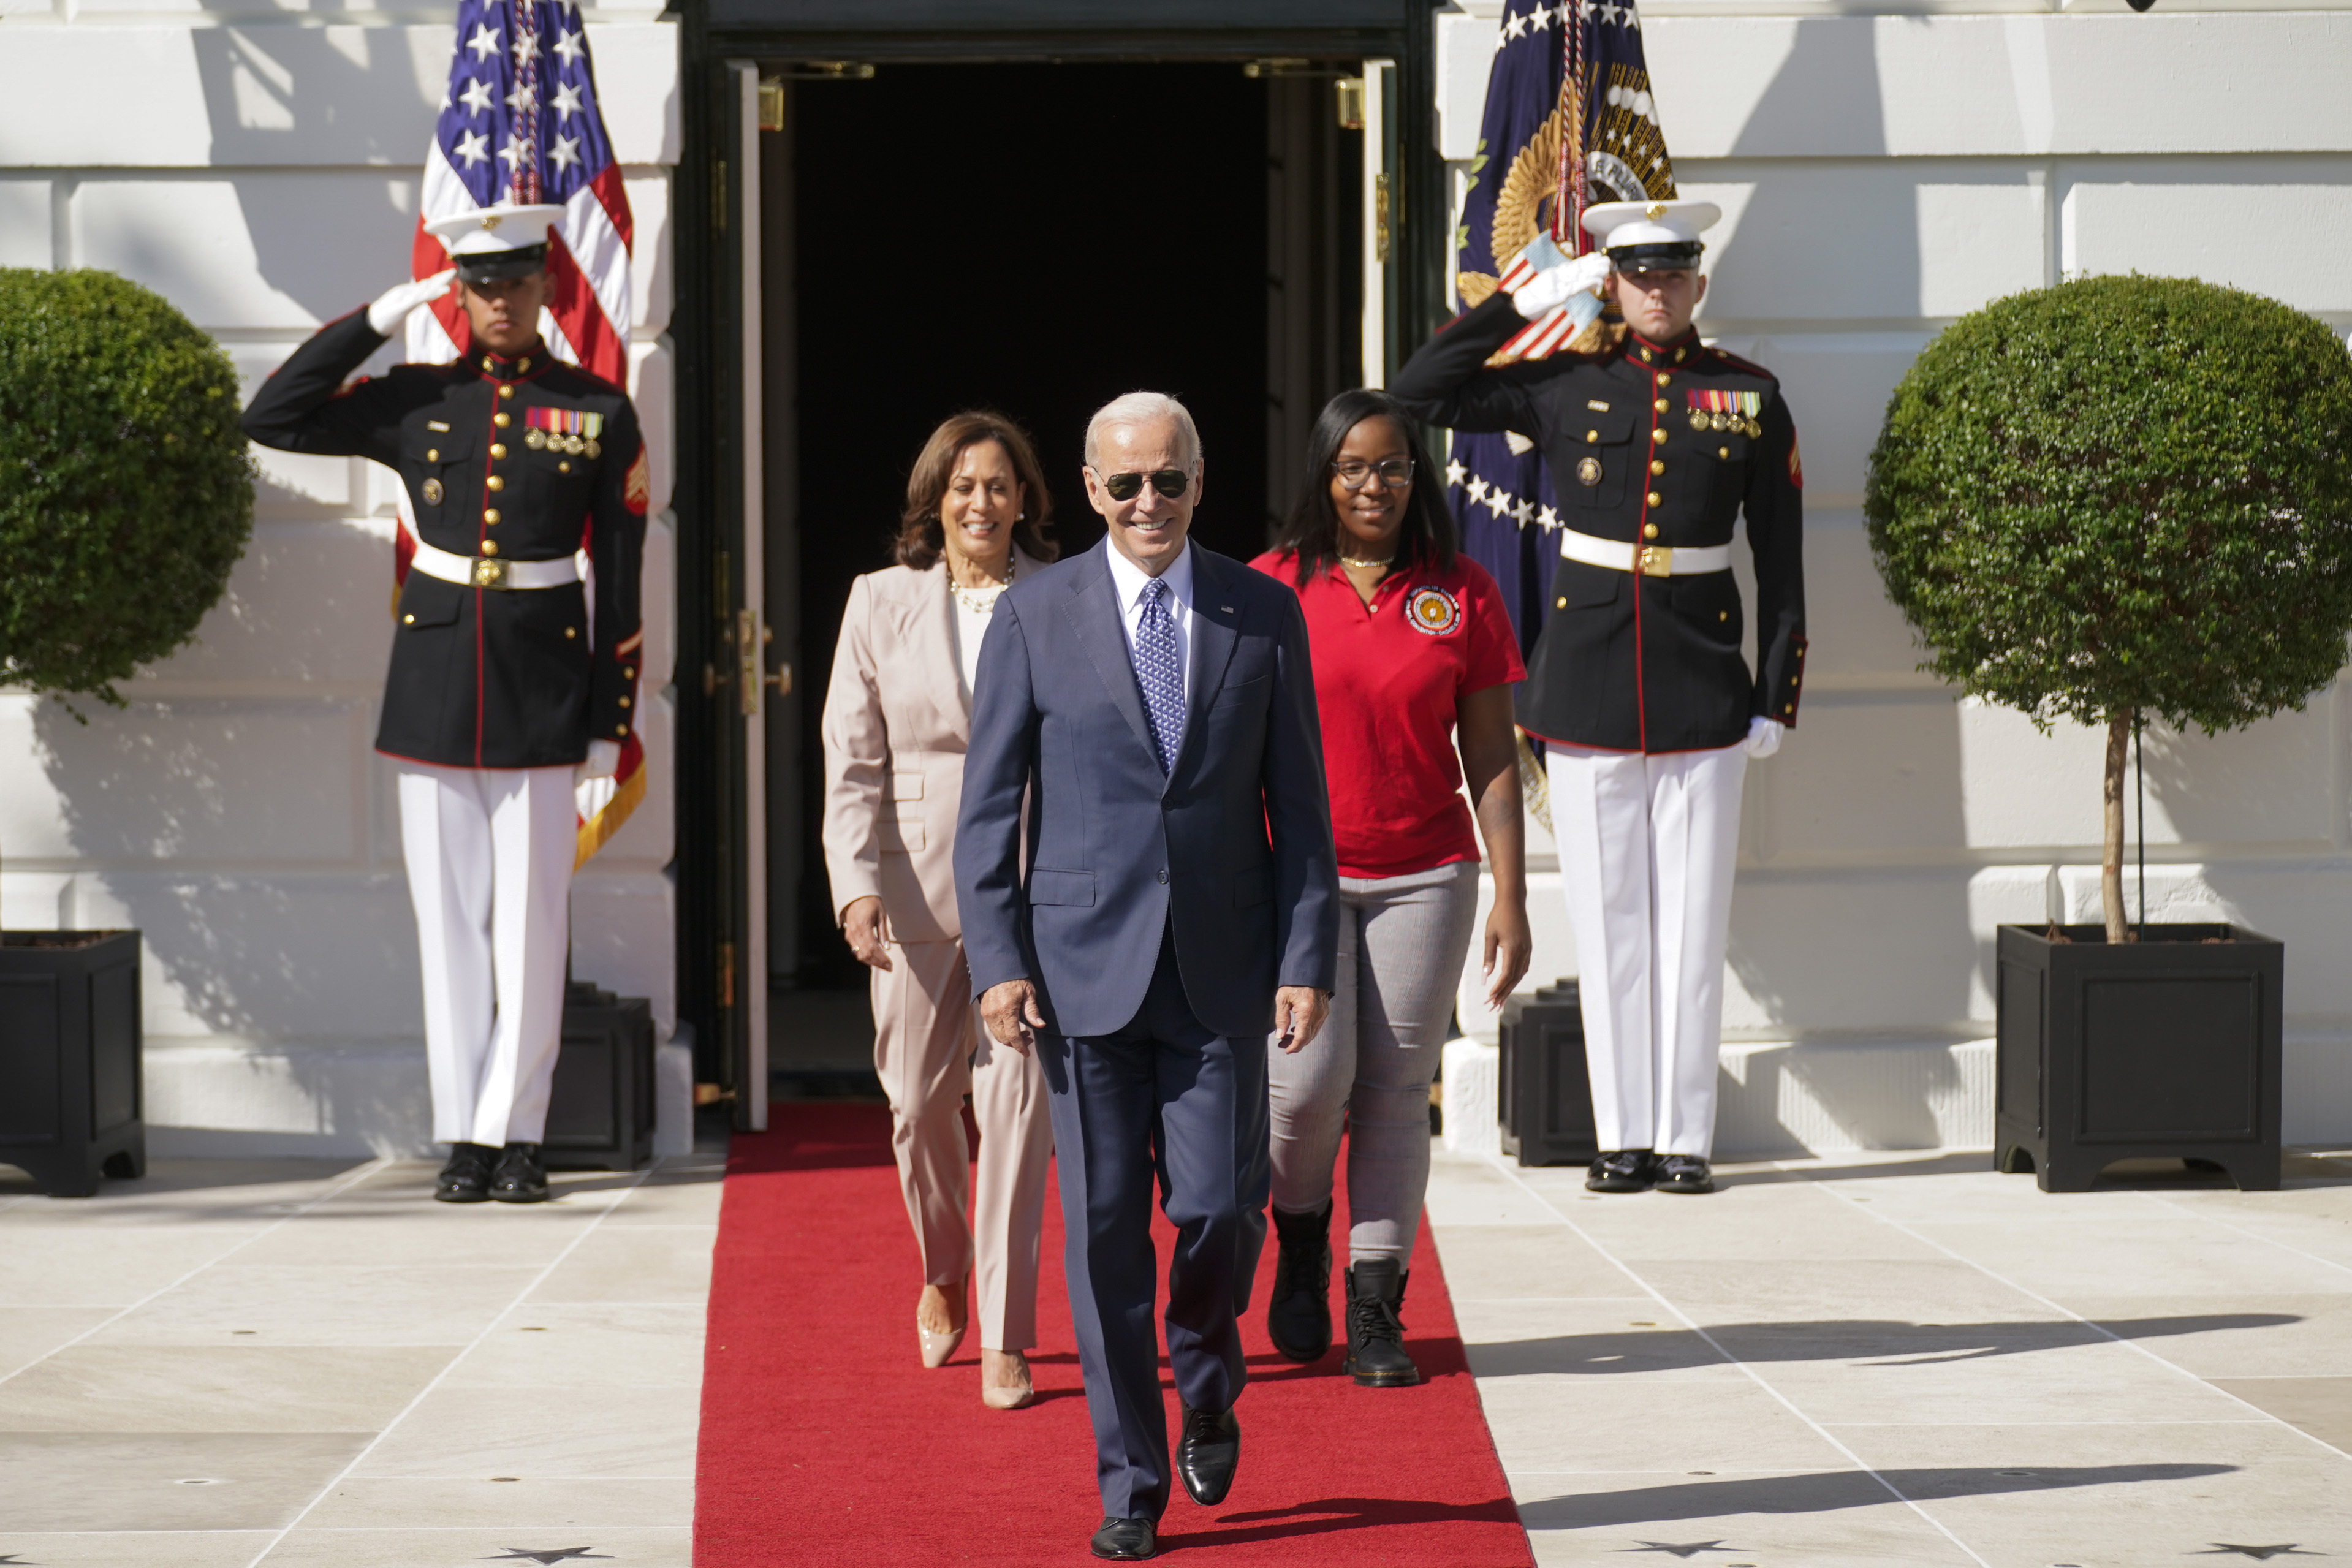 President Joe Biden arrives with Vice President Kamala Harris and Lovette Jacobs, a fifth year IBEW Local 103 electrical apprentice in Boston, for a ceremony where Biden will sign H.R. 5376, the Inflation Reduction Act of 2022, on the South Lawn of the White House in Washington, Tuesday, Sept. 13, 2022. (AP Photo/Andrew Harnik)